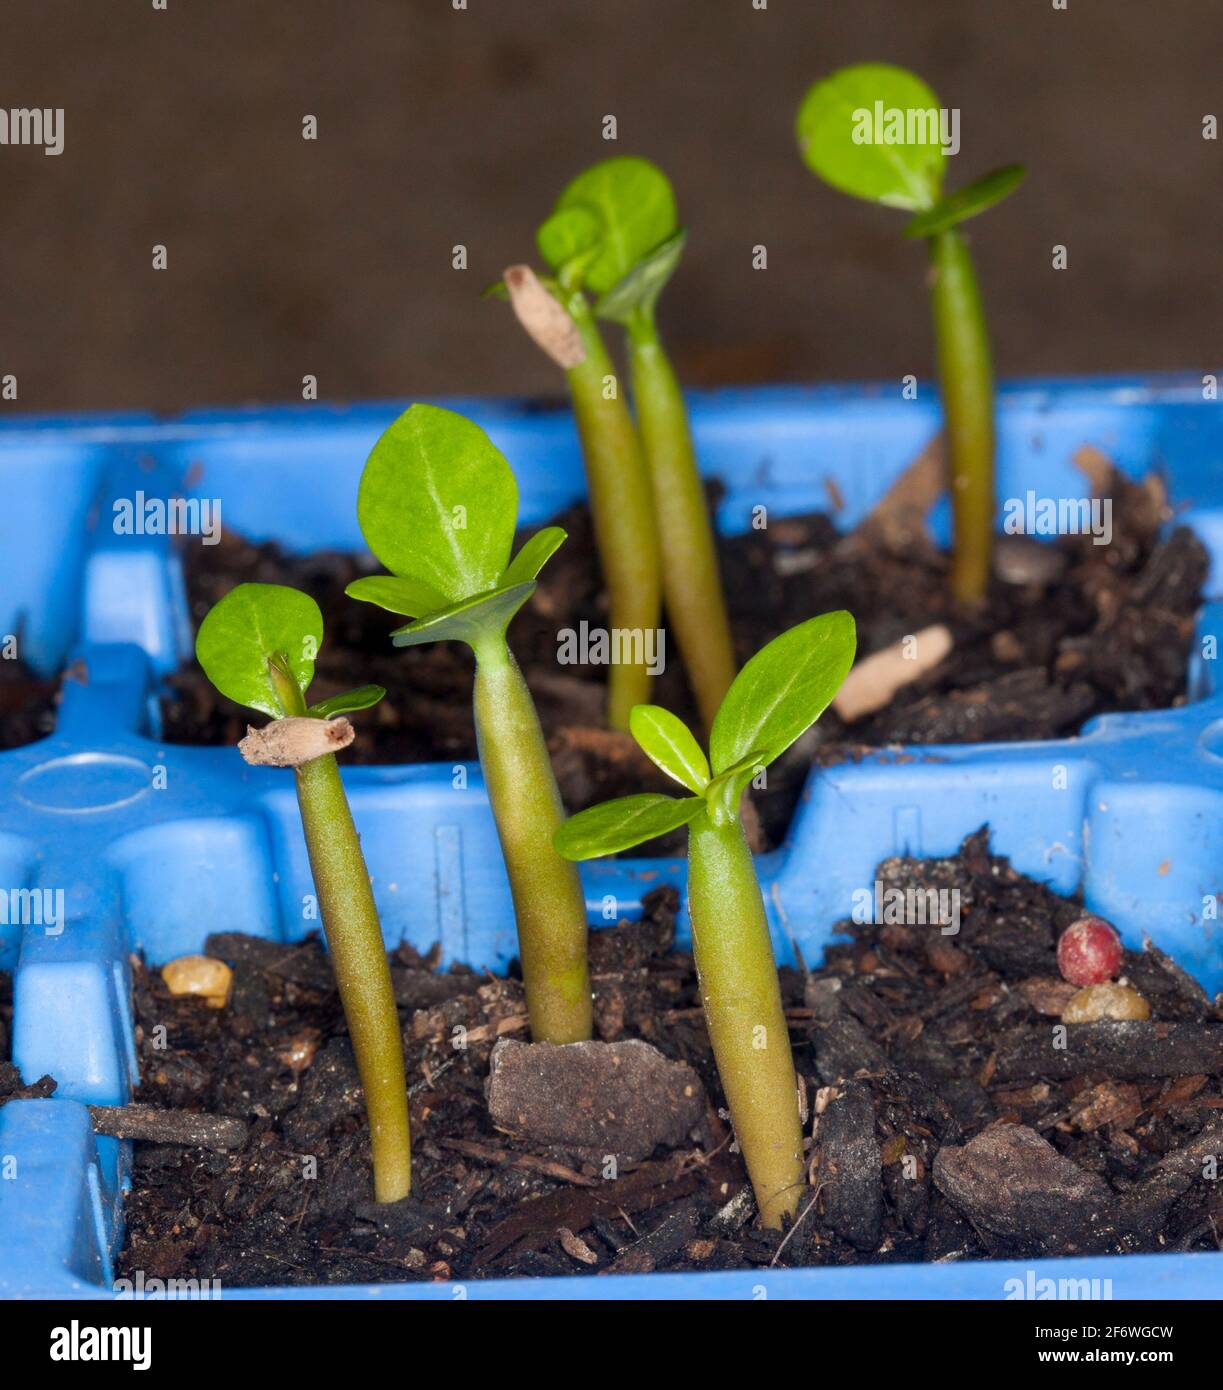 Group of seedlings of Adenium obesum, African Desert Rose, sprouting from the soil in blue plastic seed raising containers Stock Photo